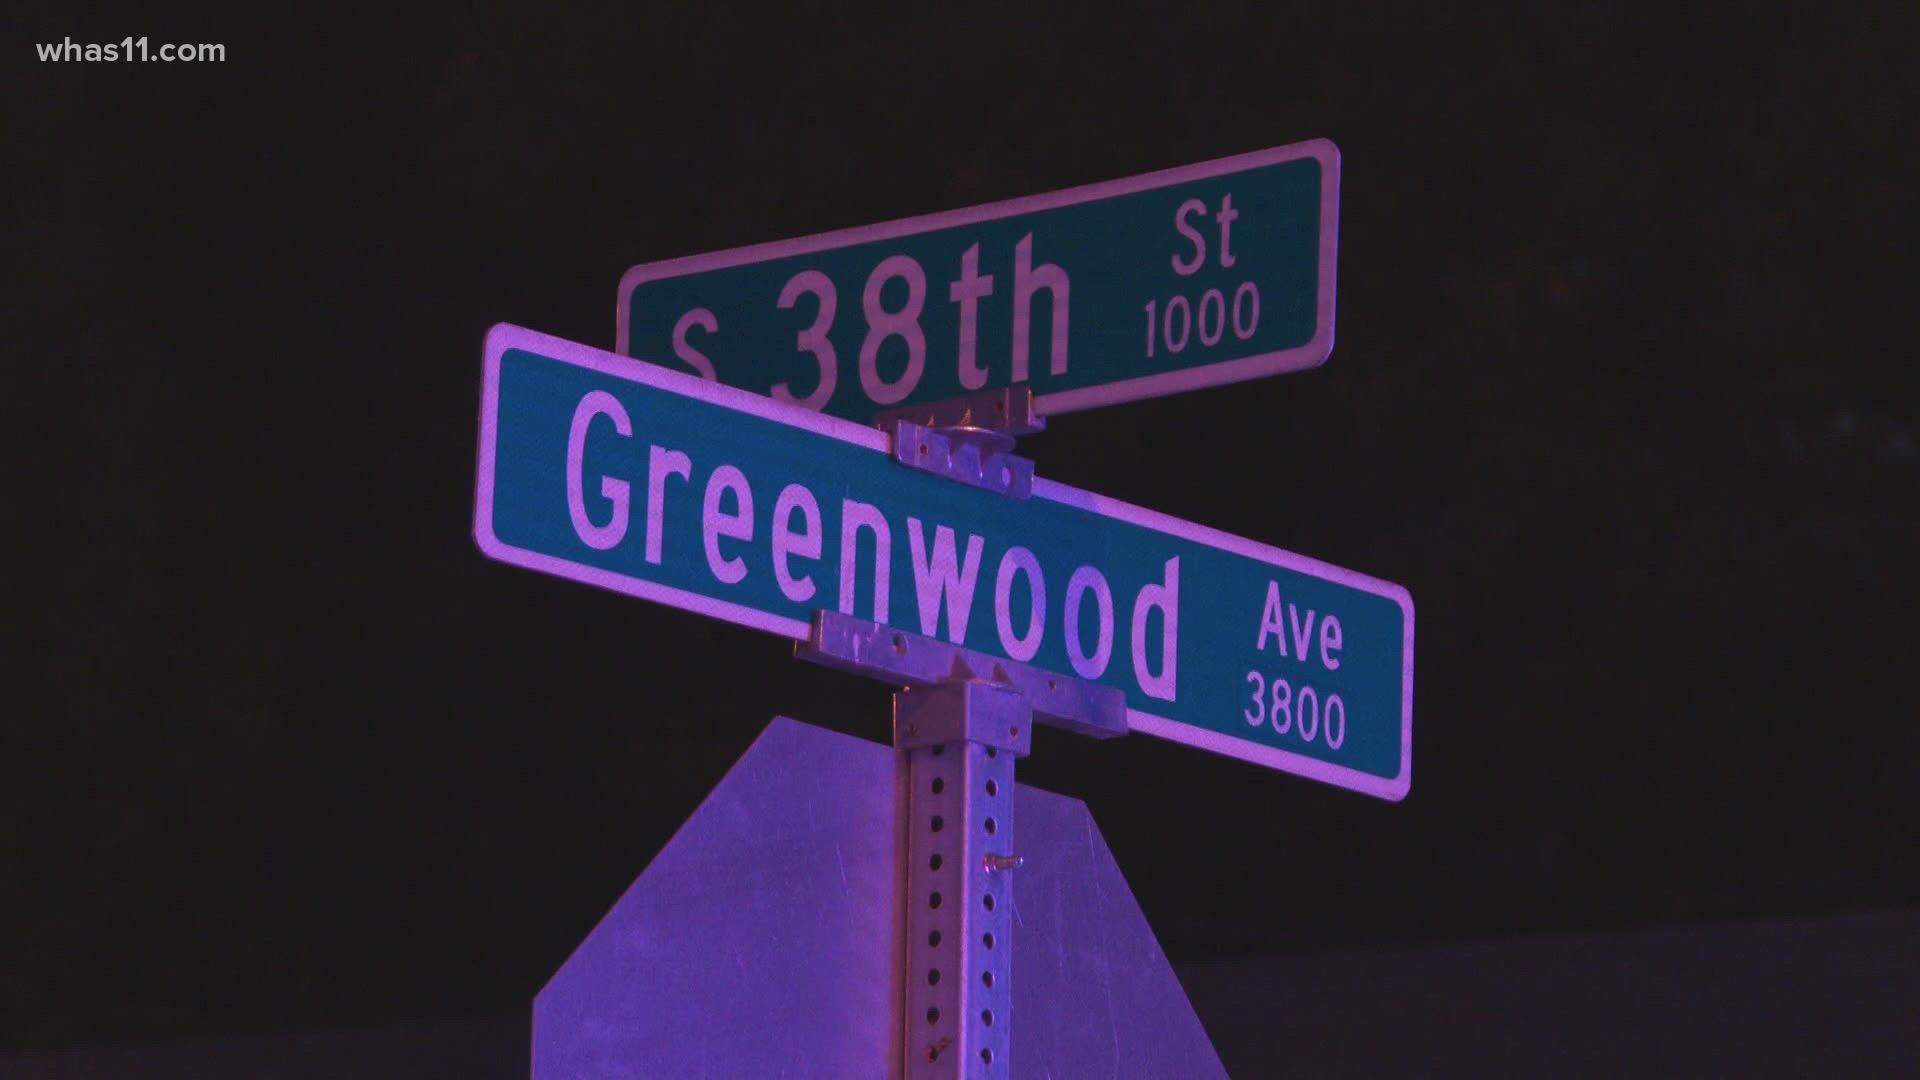 A man was shot and killed in Chickasaw Sunday night. Police said everyone has been accounted for in the incident.